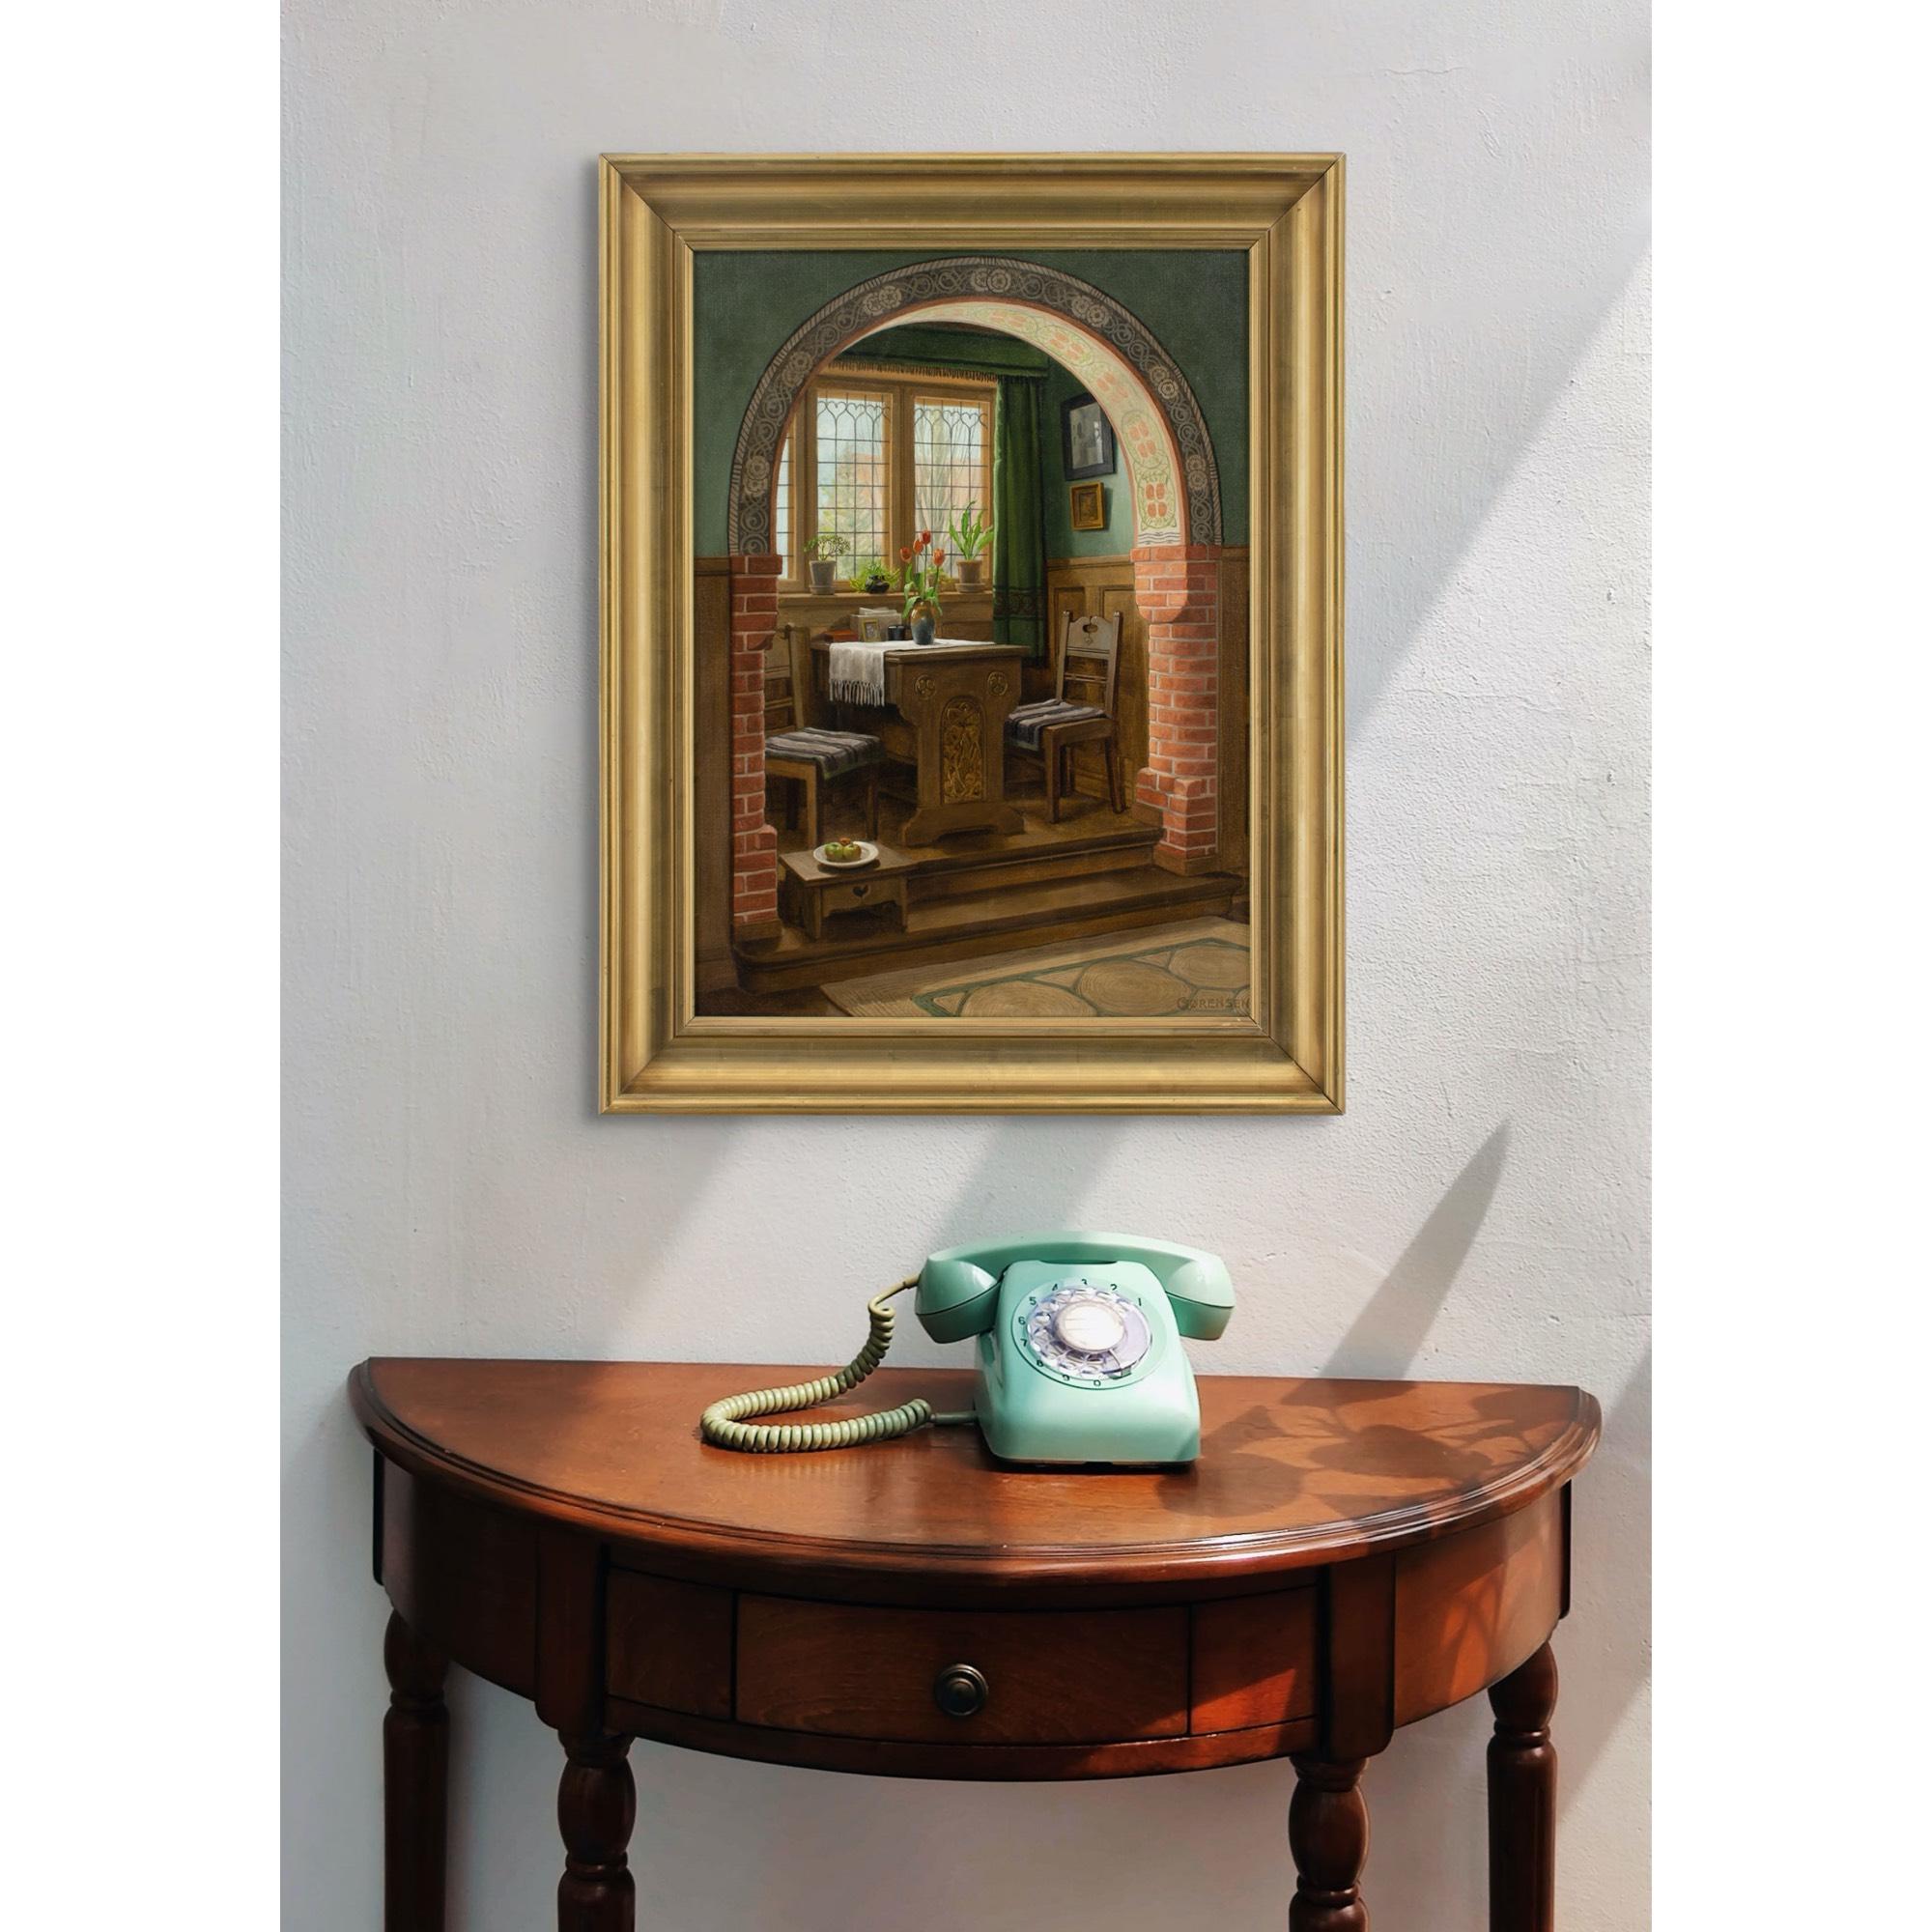 This charming early 20th-century oil painting by Danish artist C Sorensen depicts an interior with an arch, dining nook and window.

Little is known about C Sørensen, which is unusual given their evident skill. They worked predominantly during the